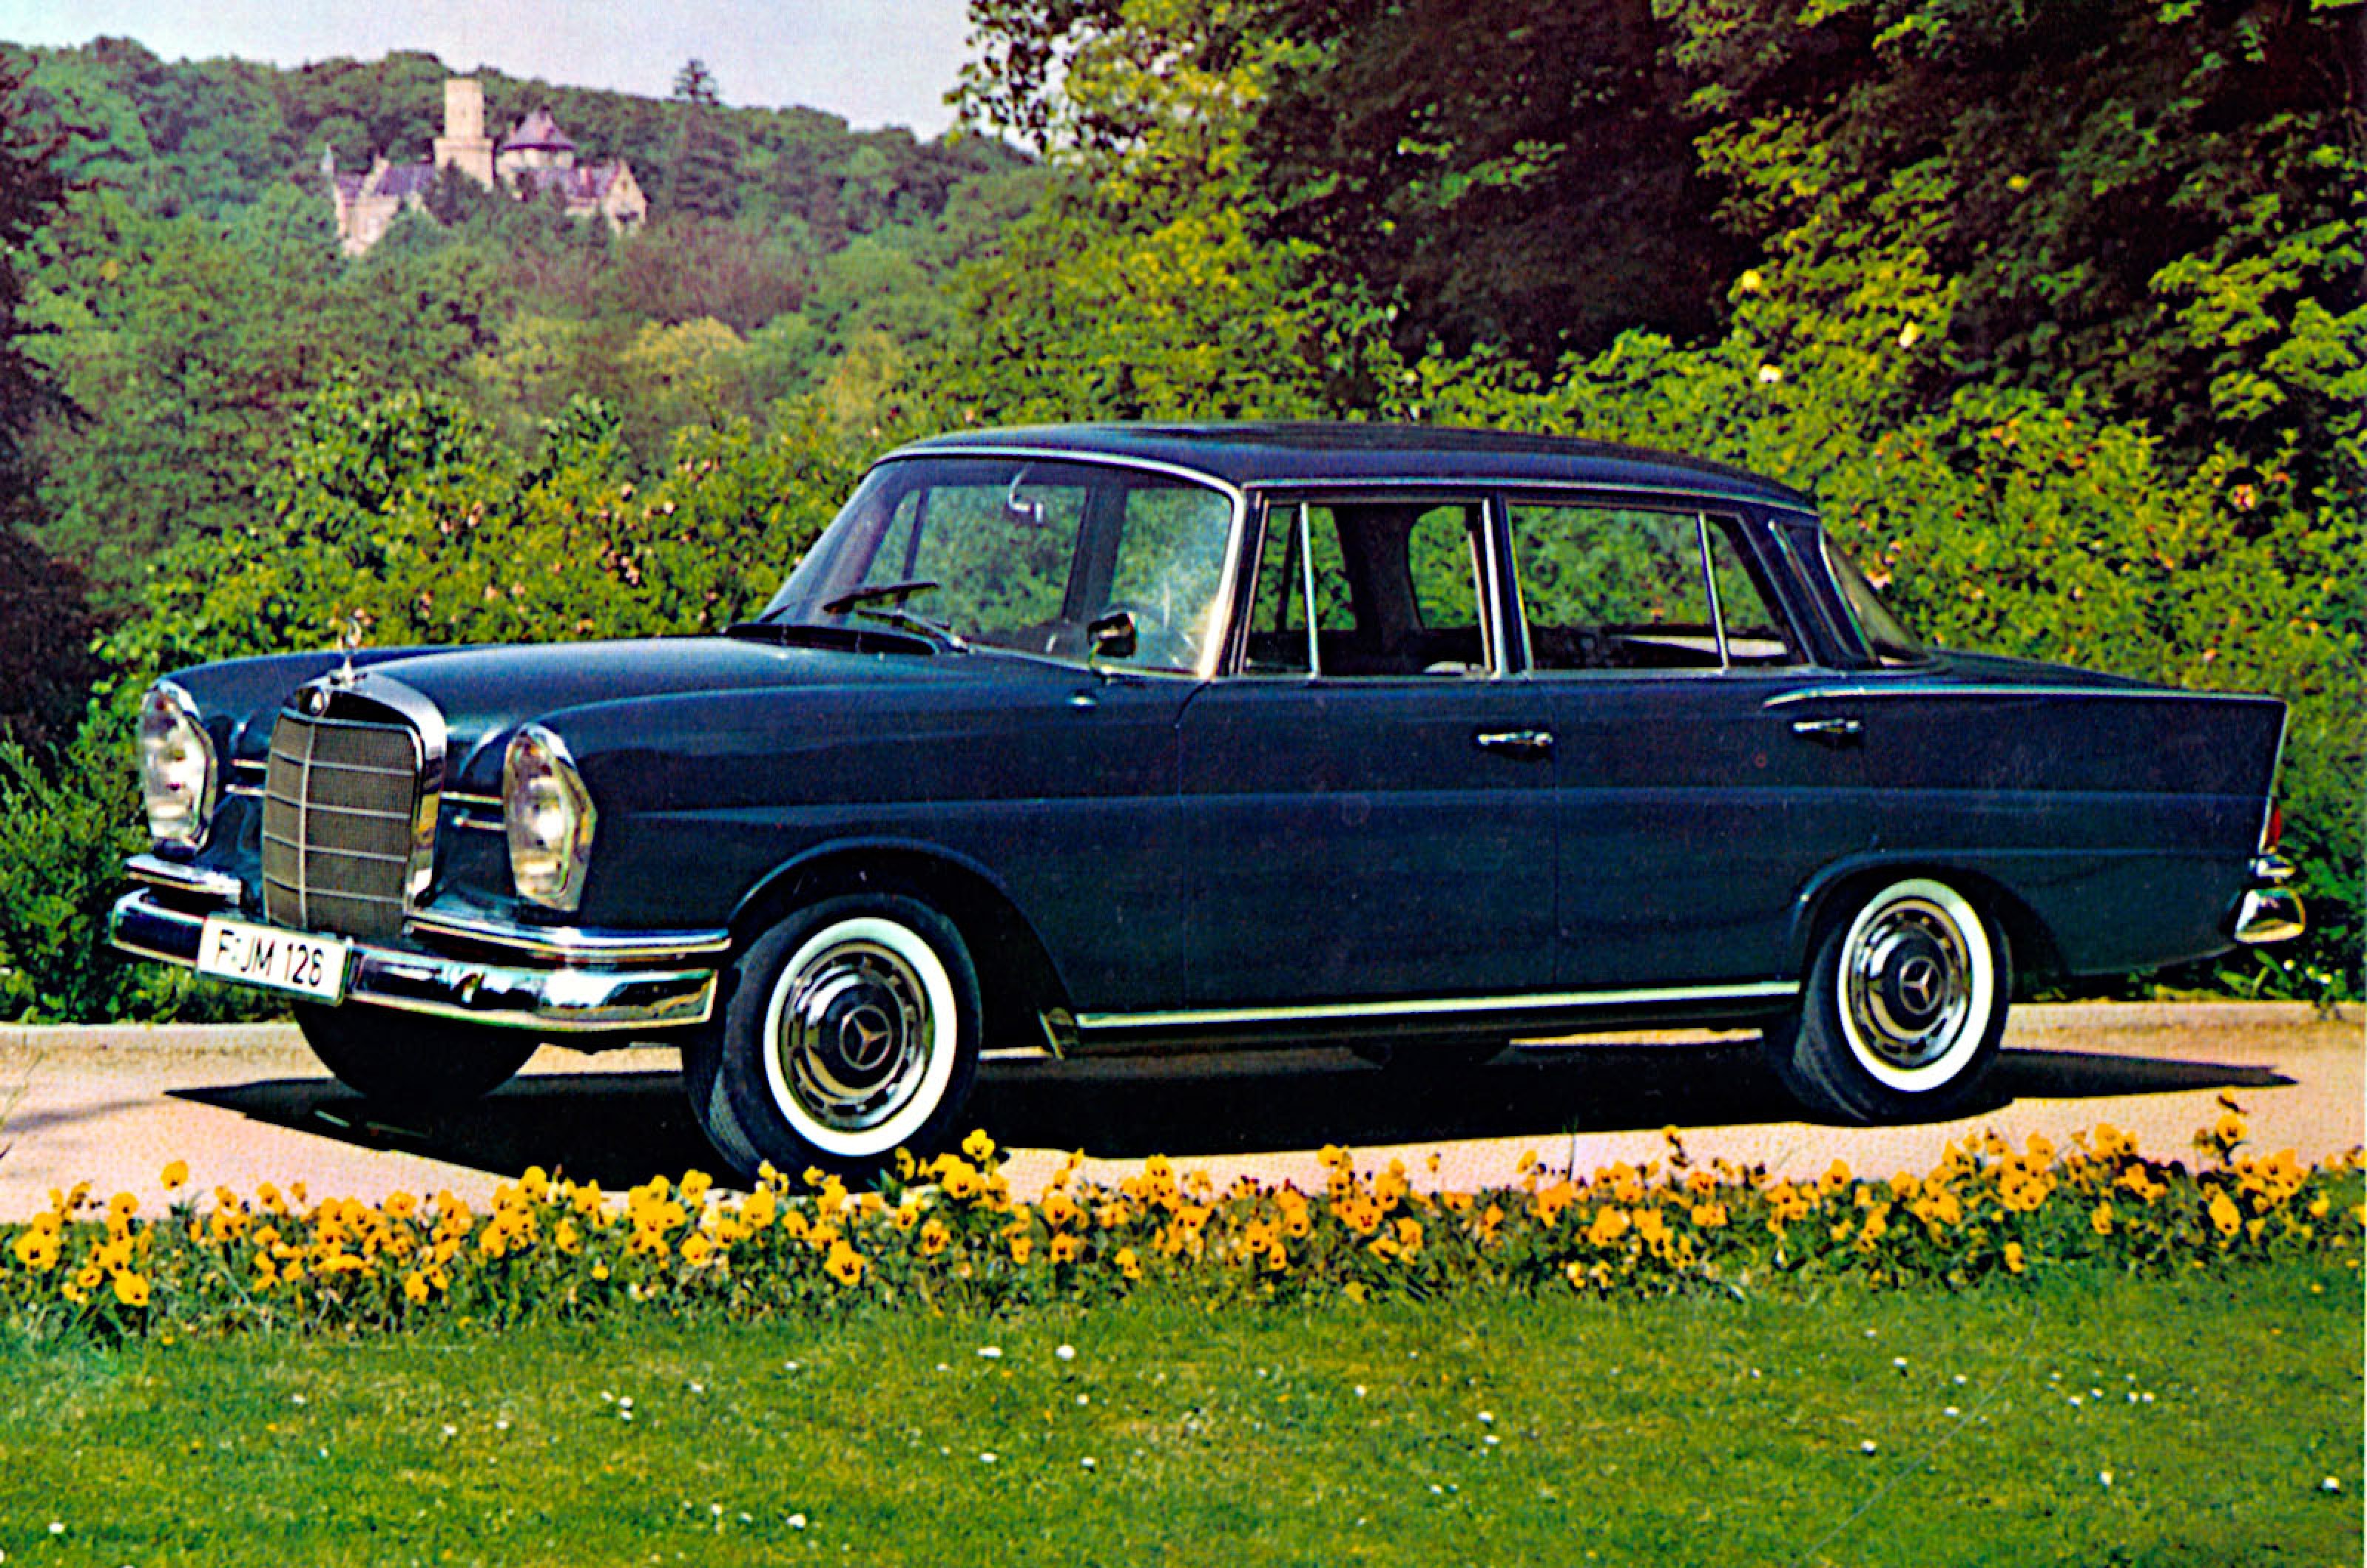 <p>Mercedes-Benz has generally avoided being influenced by American designs, but it did include tailfins (of an admittedly subtle nature) on several of its sedans, starting with the W111 series in 1959.</p>  <p>They would later appear on the W110 and the significantly larger W112, before Mercedes dropped the idea in the late 1960s.</p>  <p>Mysteriously, these cars are sometimes collectively referred to in English as ‘fintail’, even though Heckflosse, as they’re called in German, definitely translates to ‘tailfin’.</p>